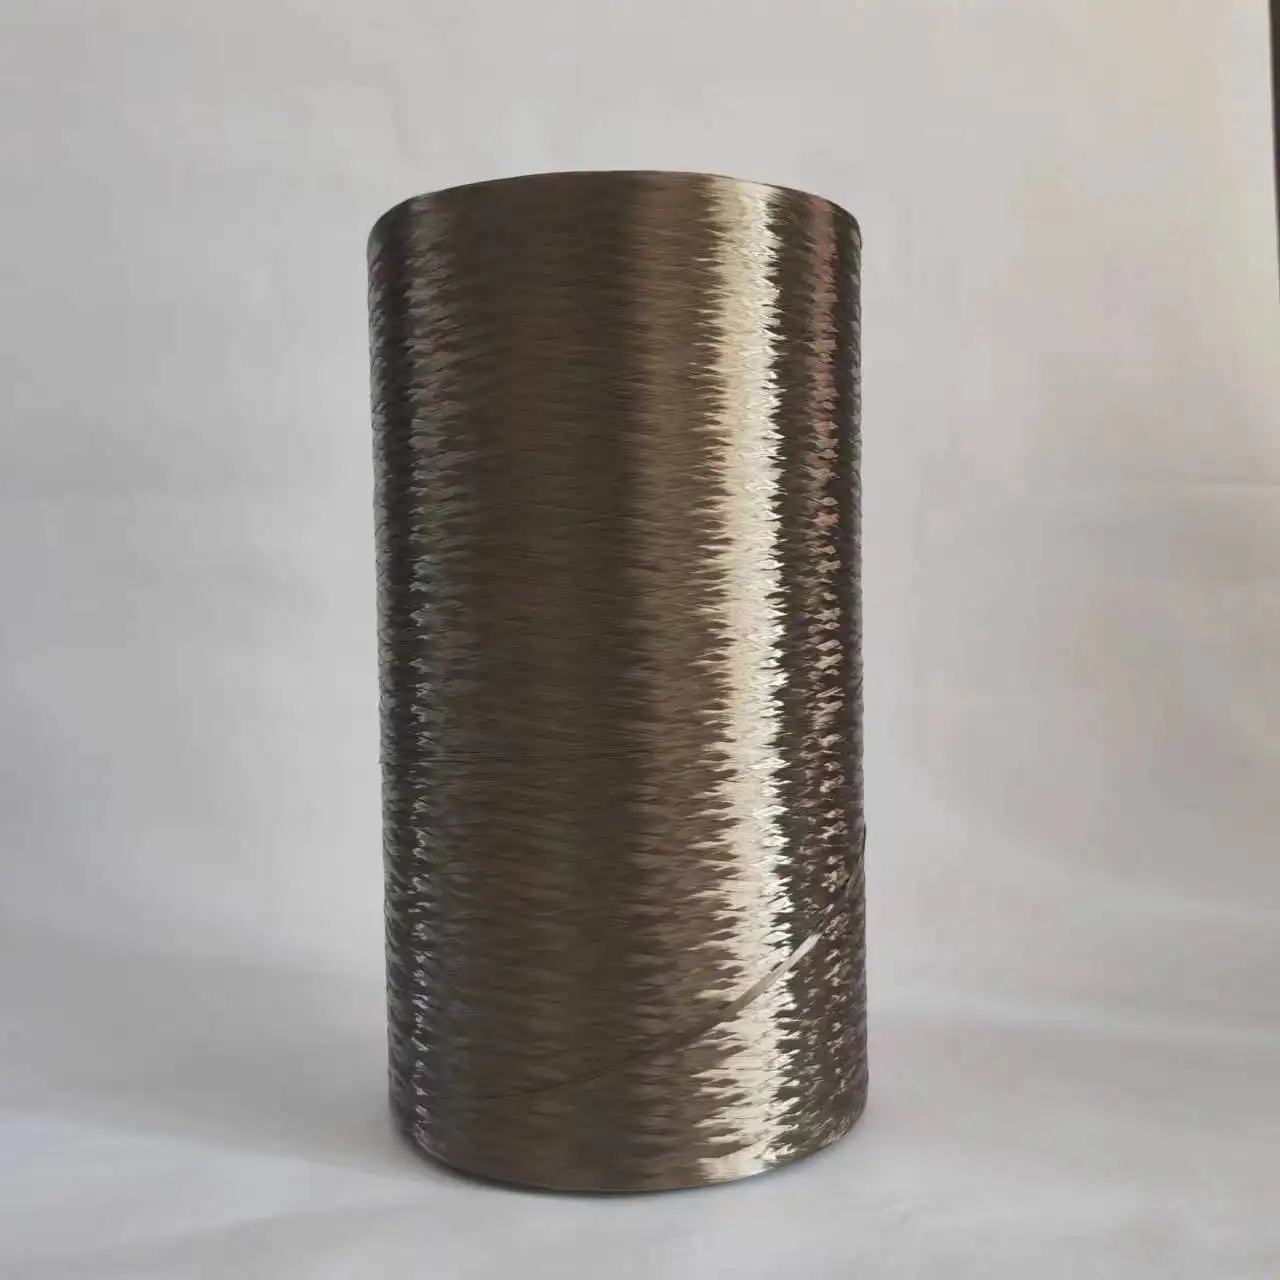 Continuous Basalt mineral Fiber Roving untwisted yarn